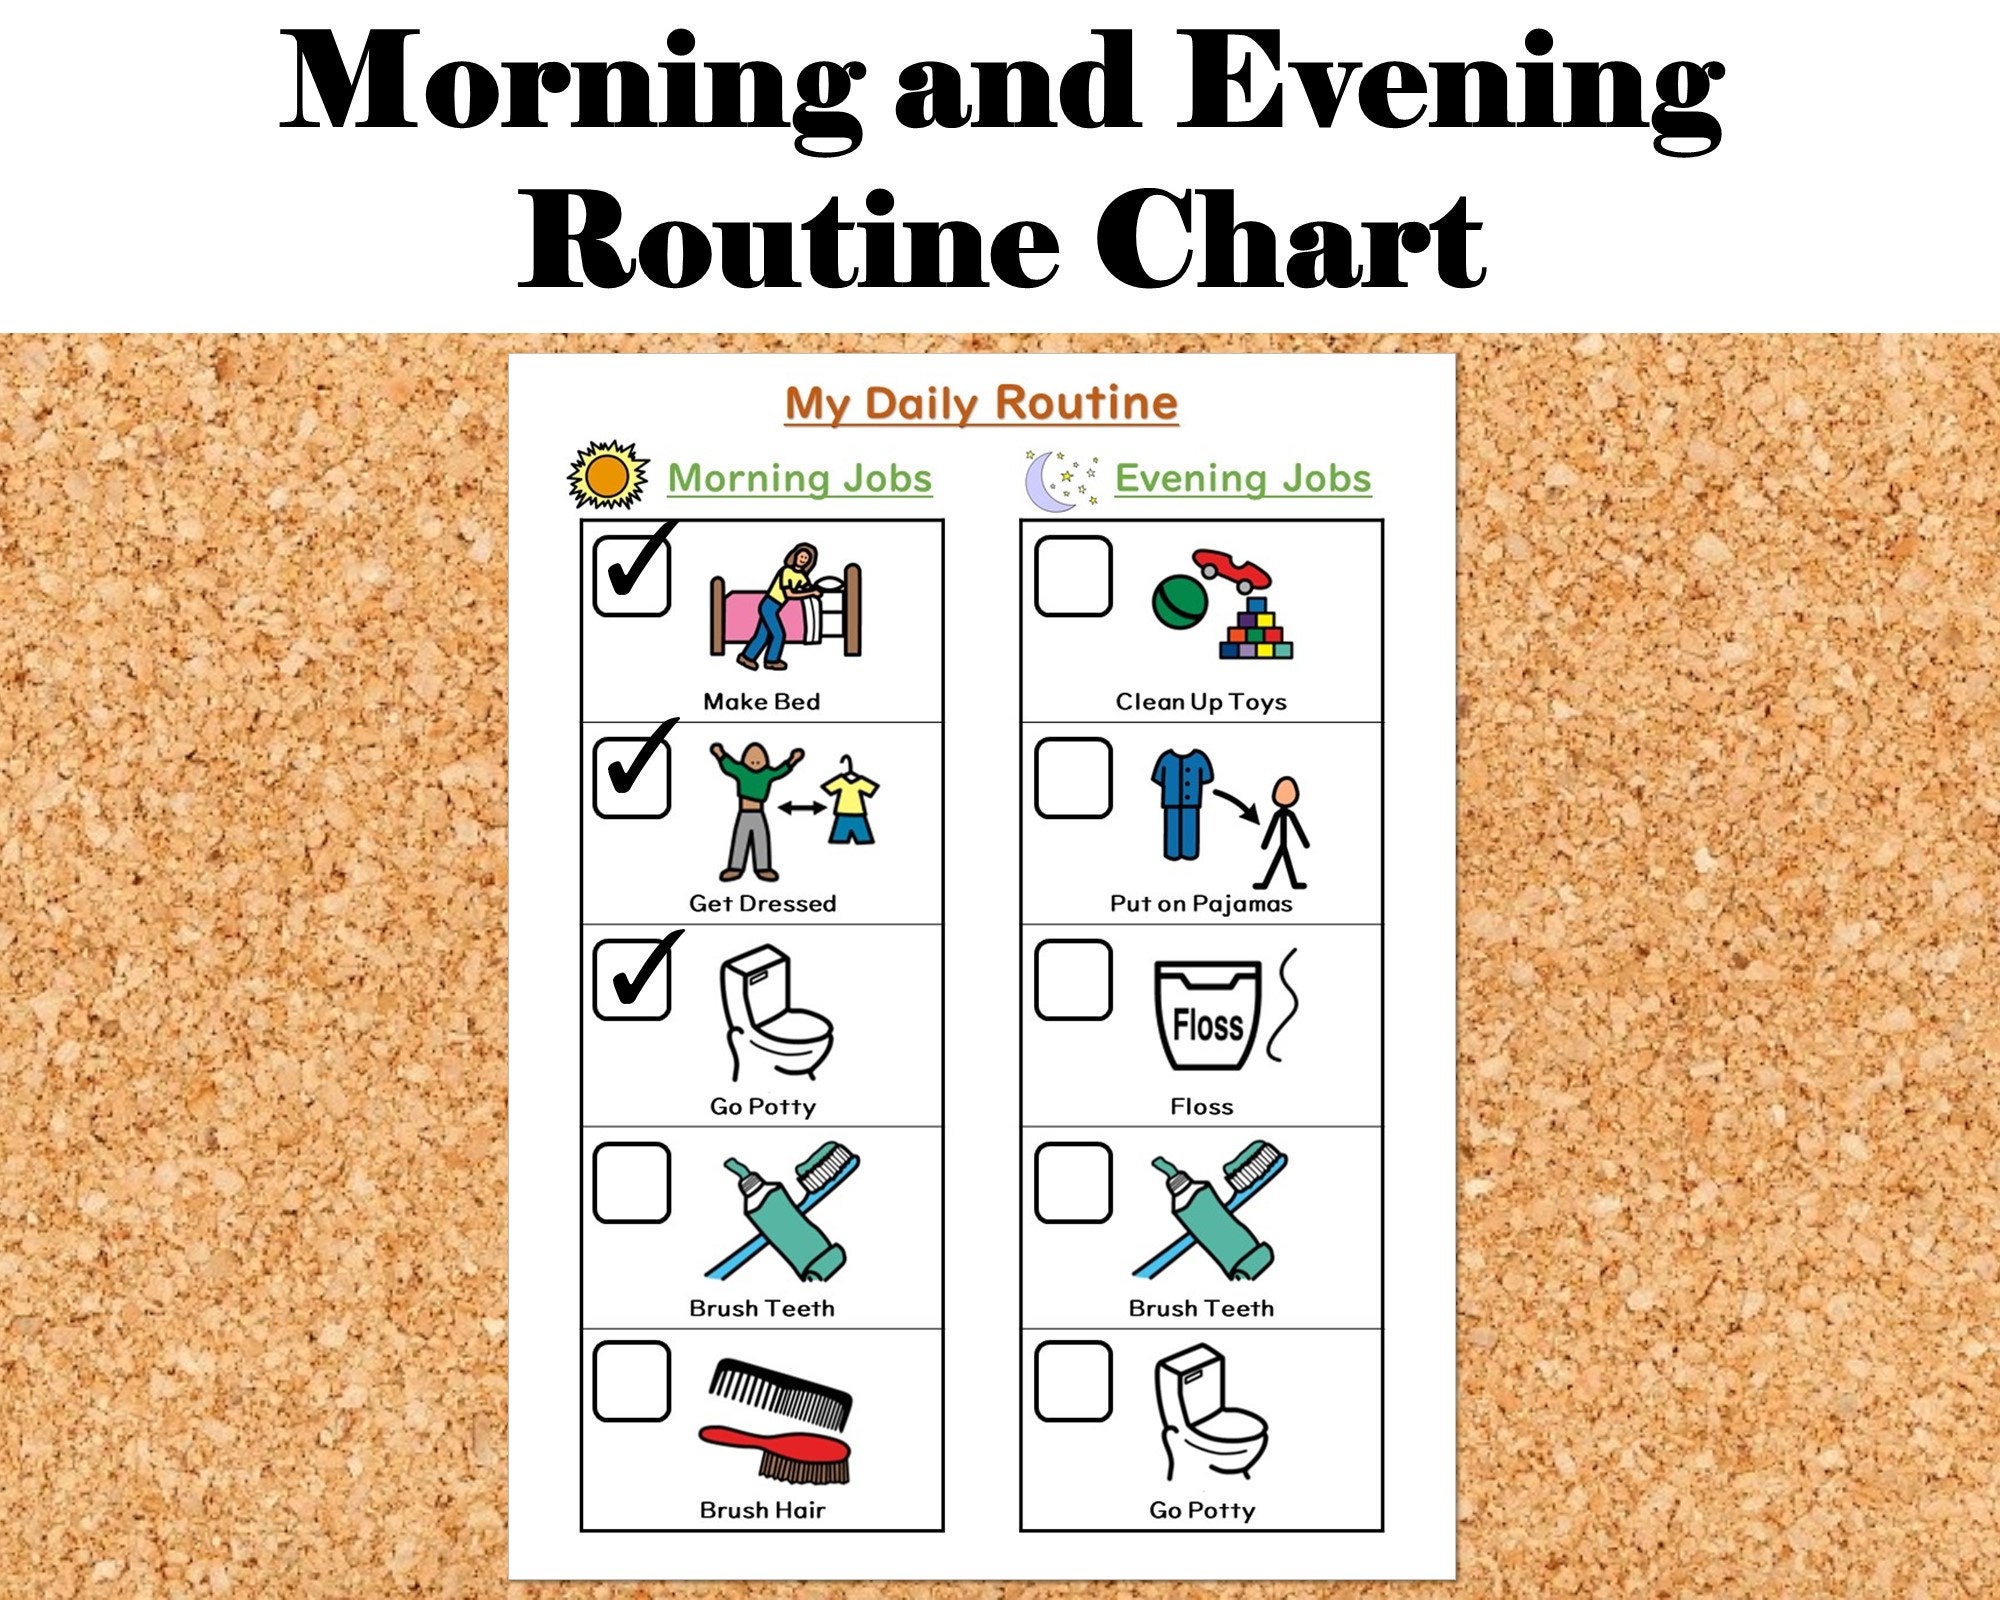 morning-and-evening-routine-chart-for-kids-etsy